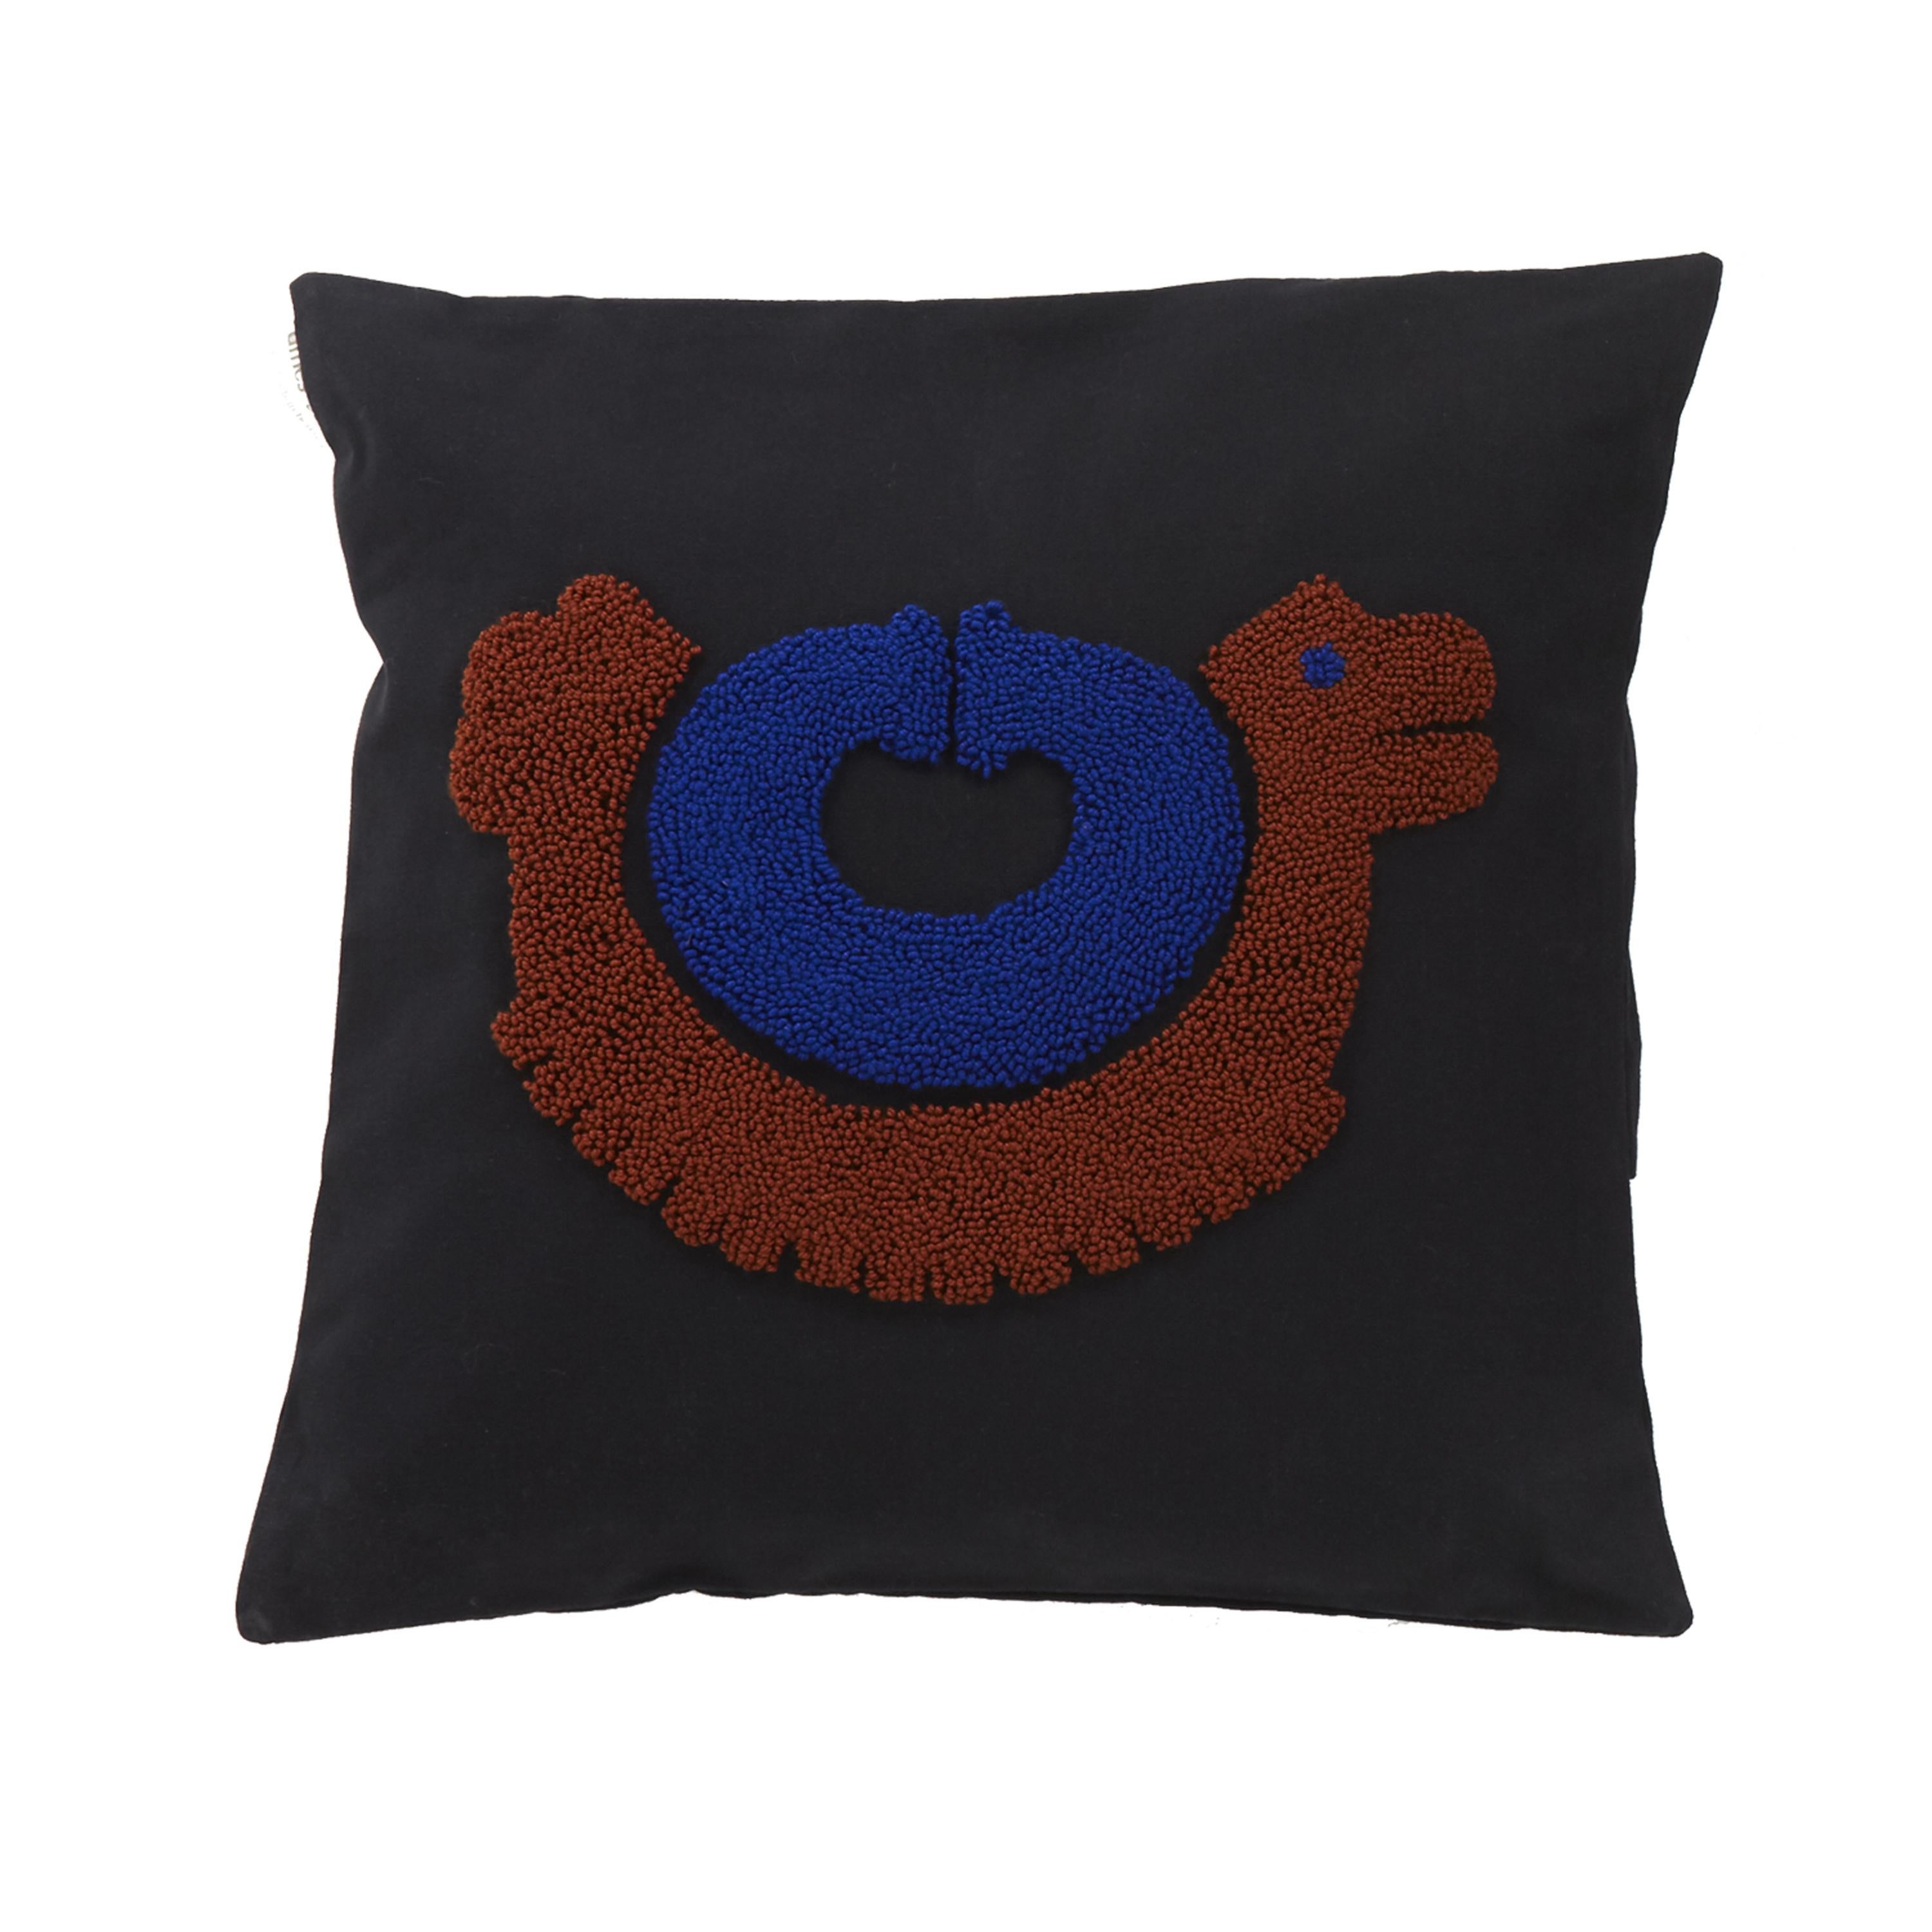 Pichu Nido cushion by Sebastian Herkner
Materials: 100% cotton. 
Technique: Hand-woven in Colombia. 
Dimensions: W 38 x H 38 cm 
Available in colors: nature, night blue, beige pink, terracotta.

The Nido Pichu Cushion combines joyful colors with